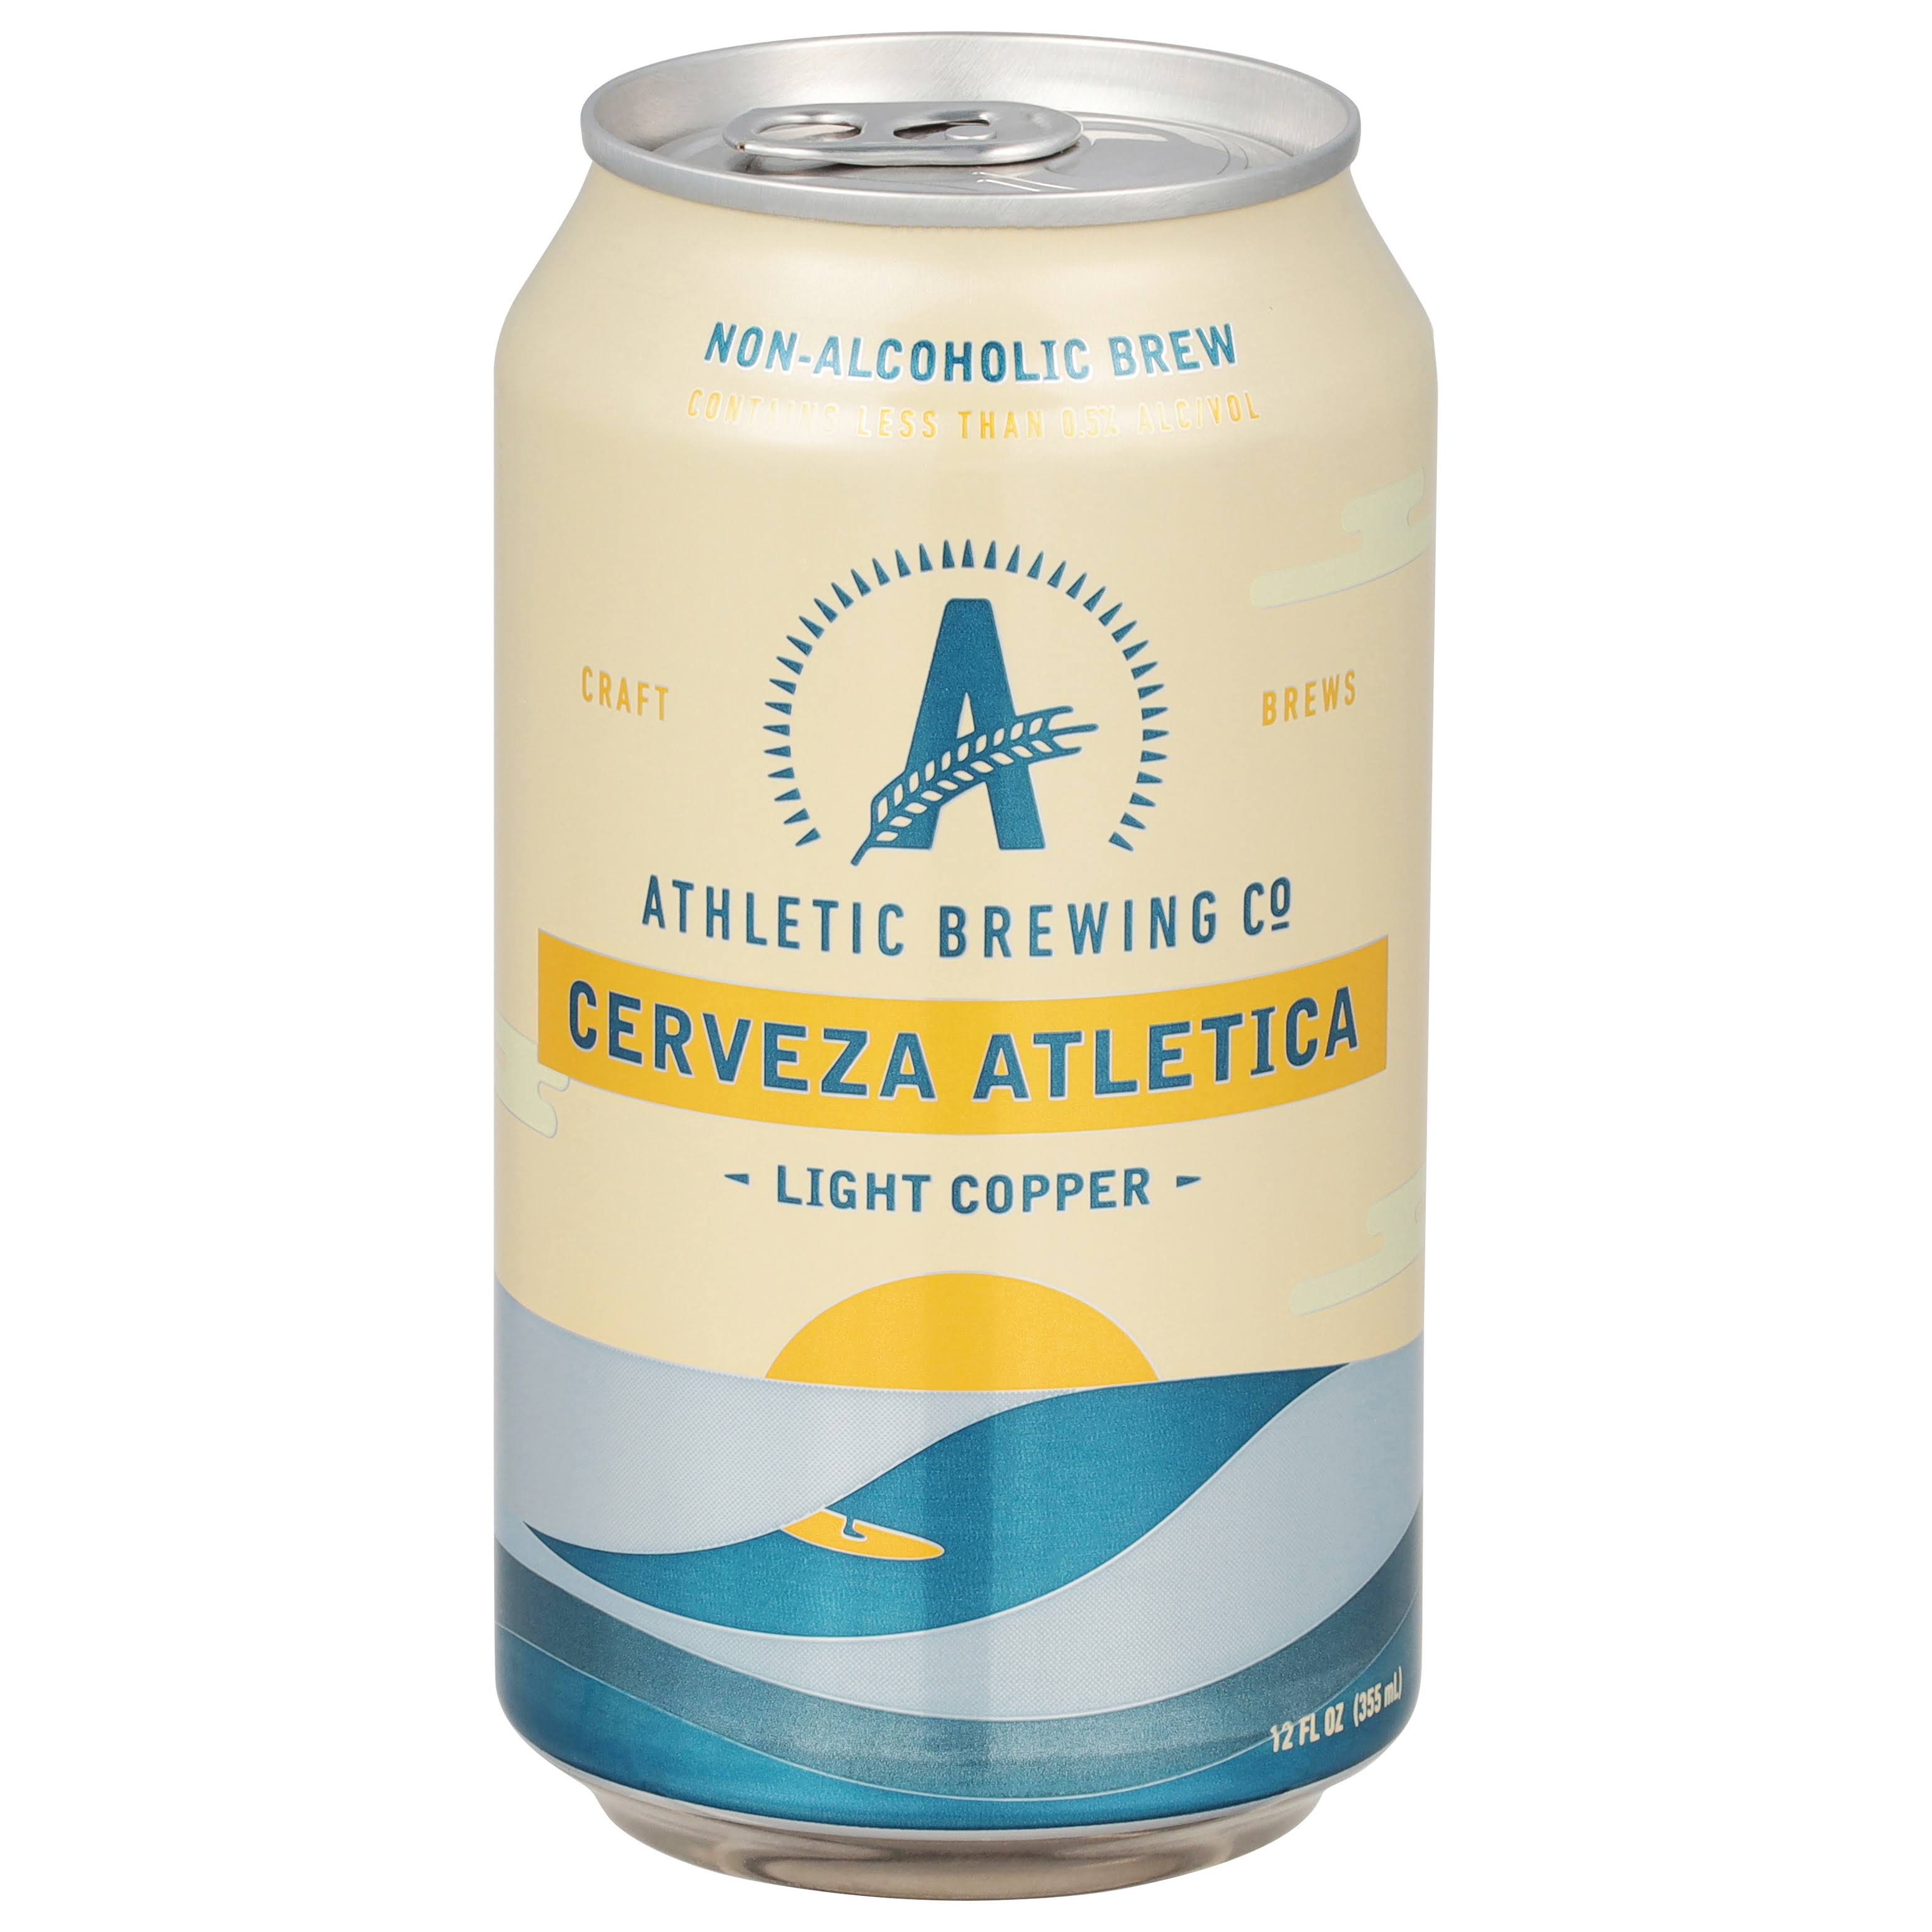 Athletic Brewing Co Beer, Witbier, Wits Peak, 6 Pack - 6 pack, 12 fl oz cans